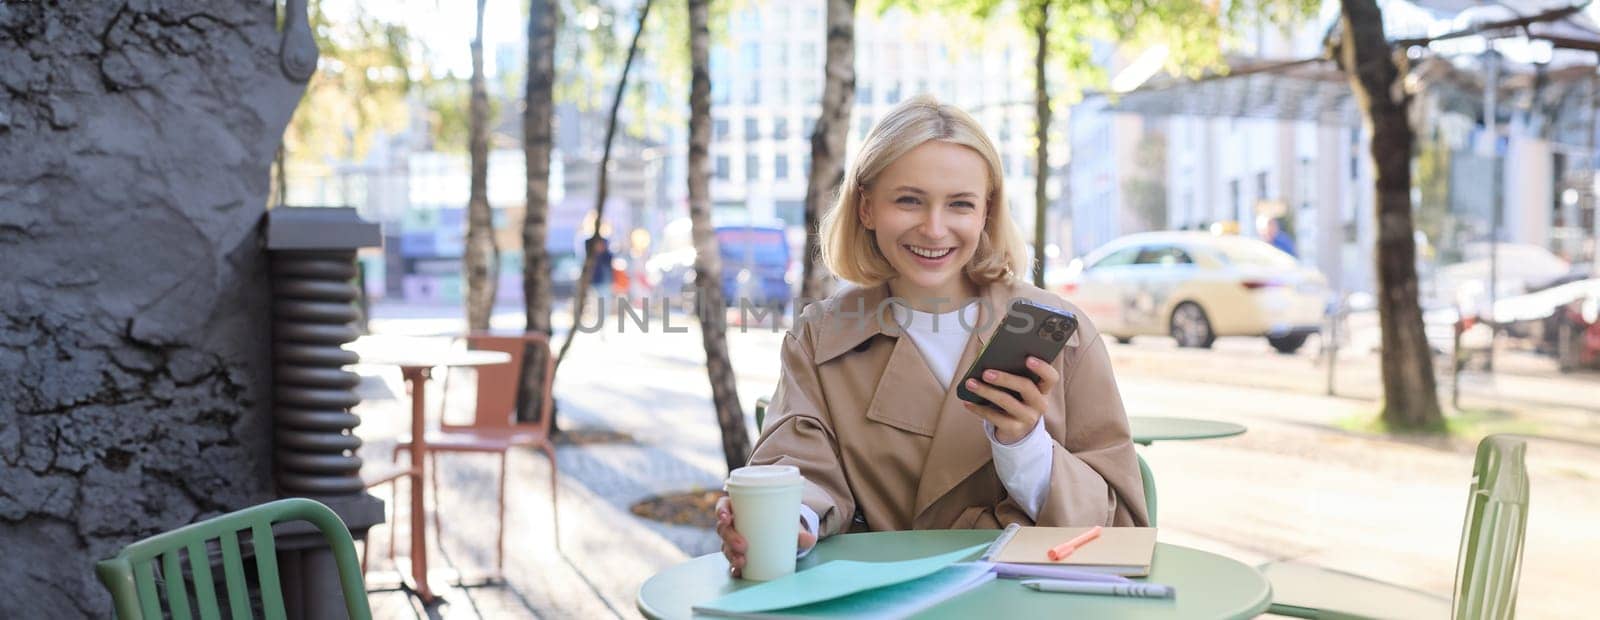 Portrait of blond smiling woman with smartphone, holding cup of coffee, drinking chai and enjoying sunny day outdoors in city centre.